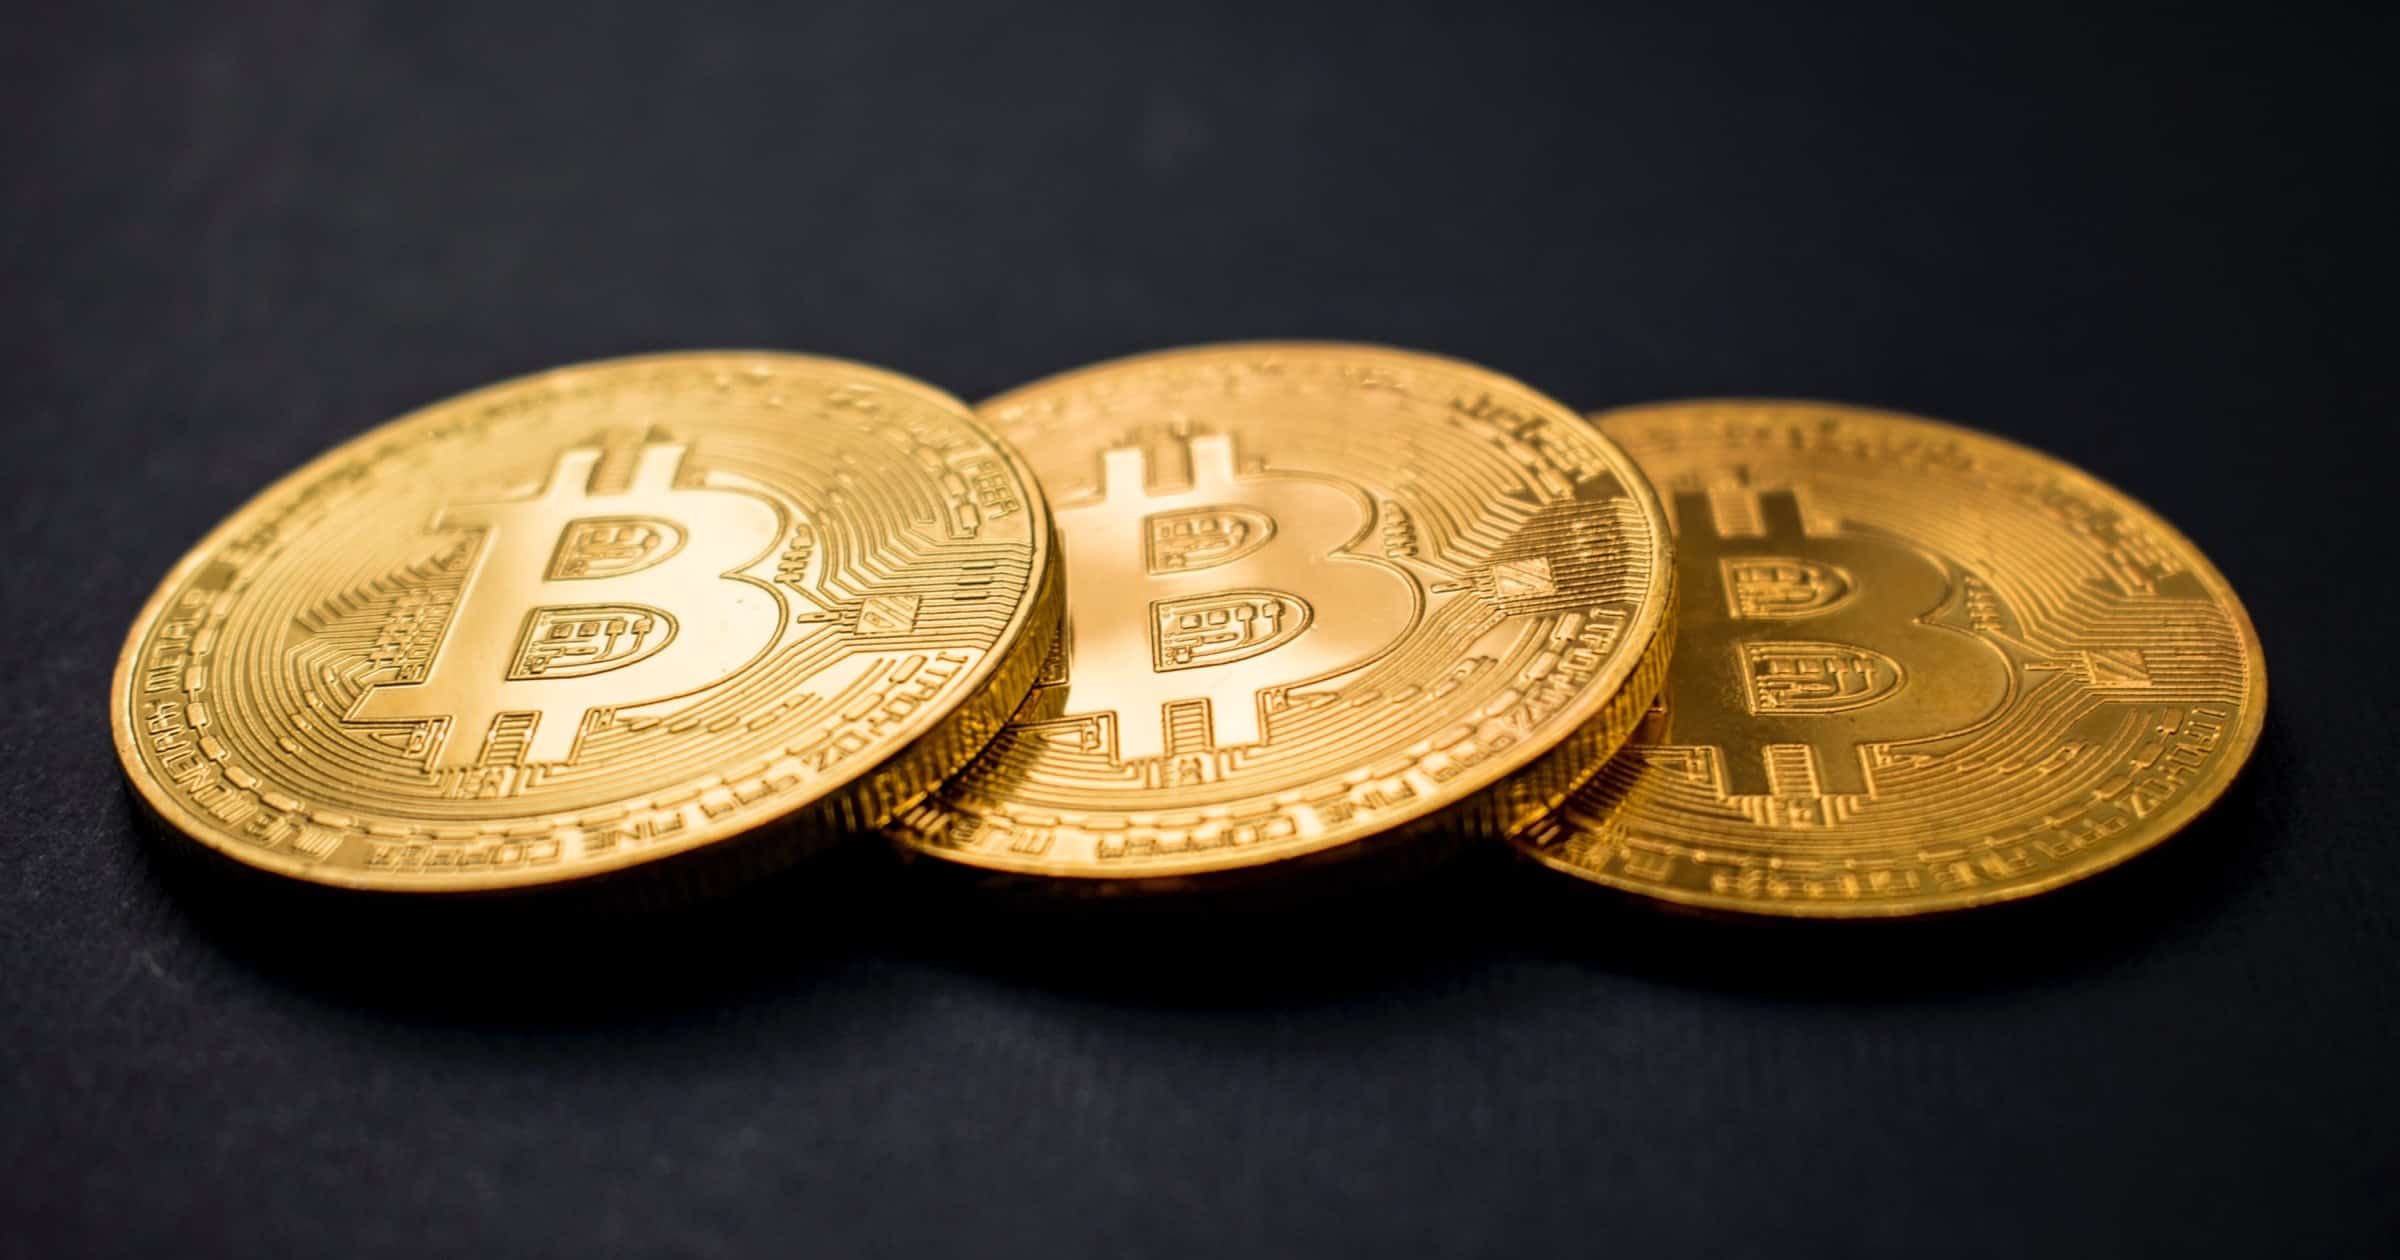 IRS Can Seize Your Bitcoin if you Have Unpaid Taxes